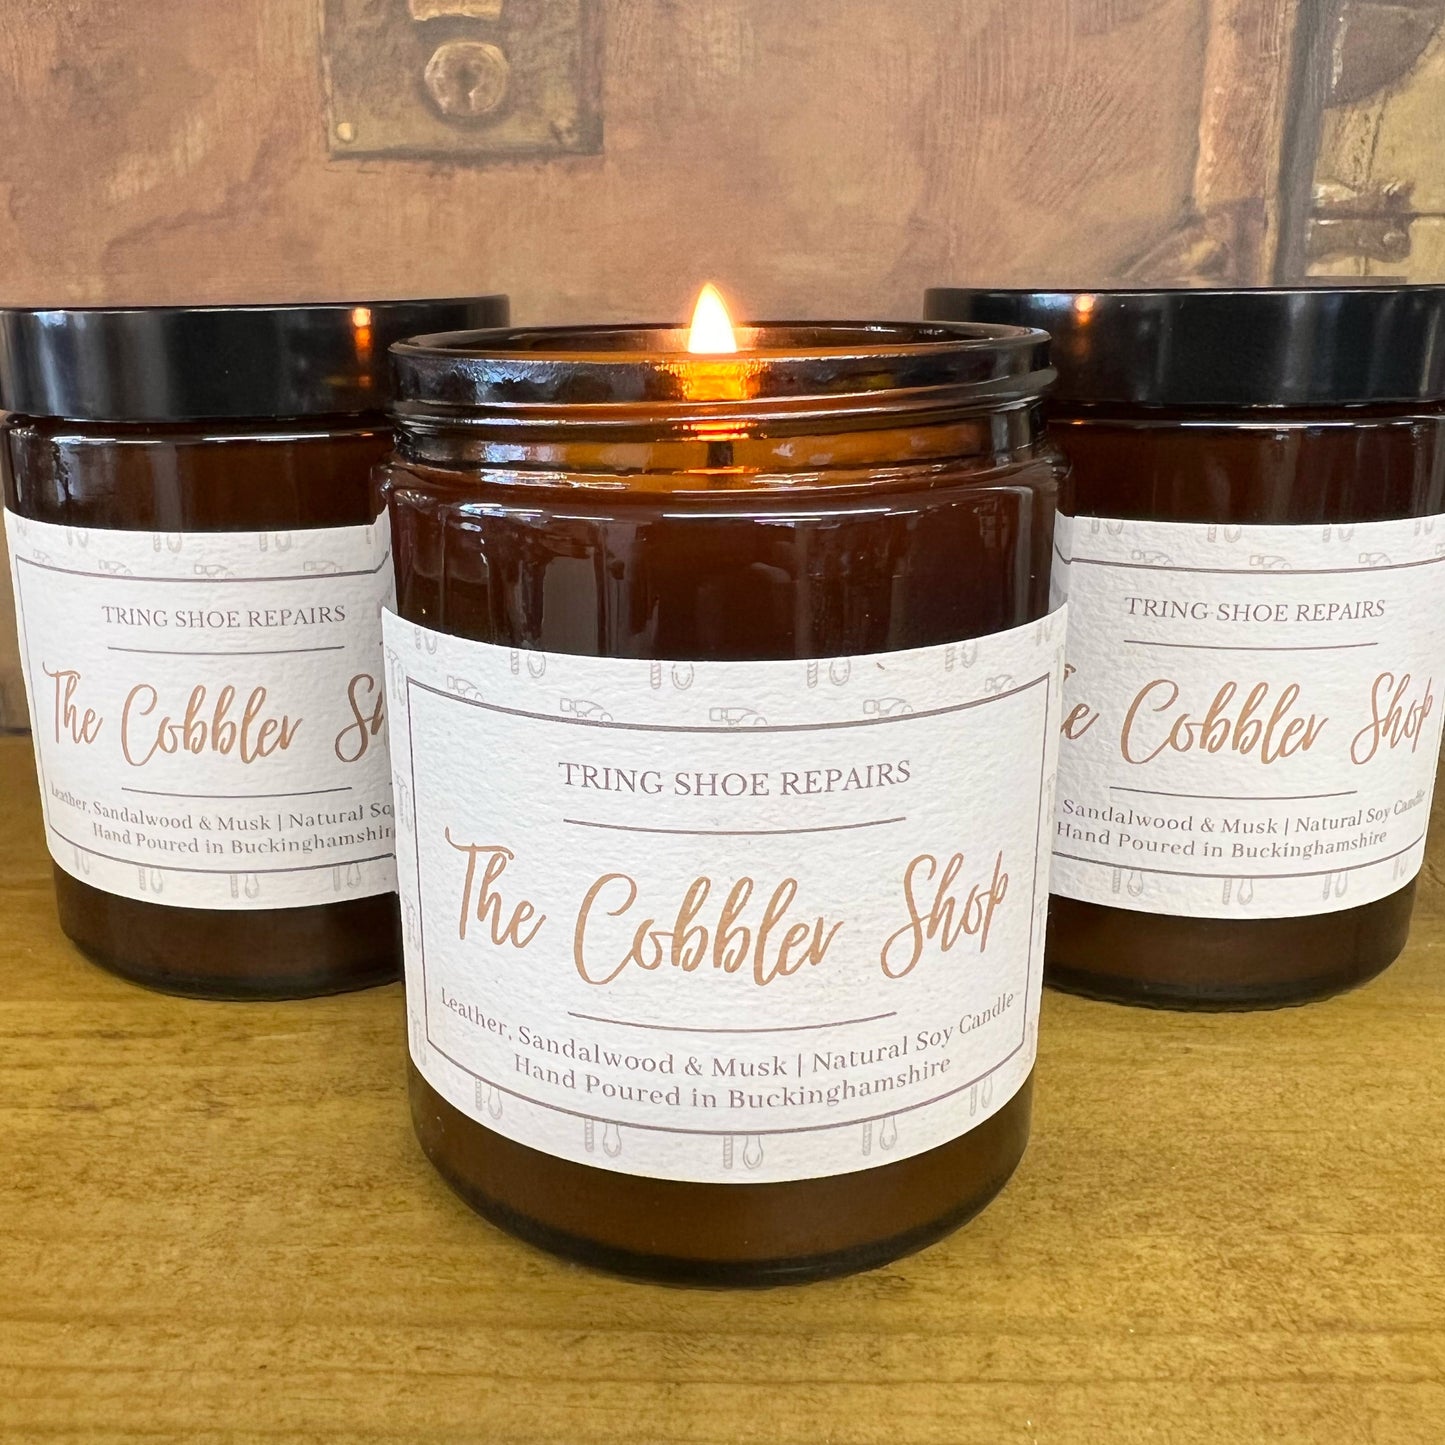 'The Cobbler Shop' Signature Leather Scented Candle